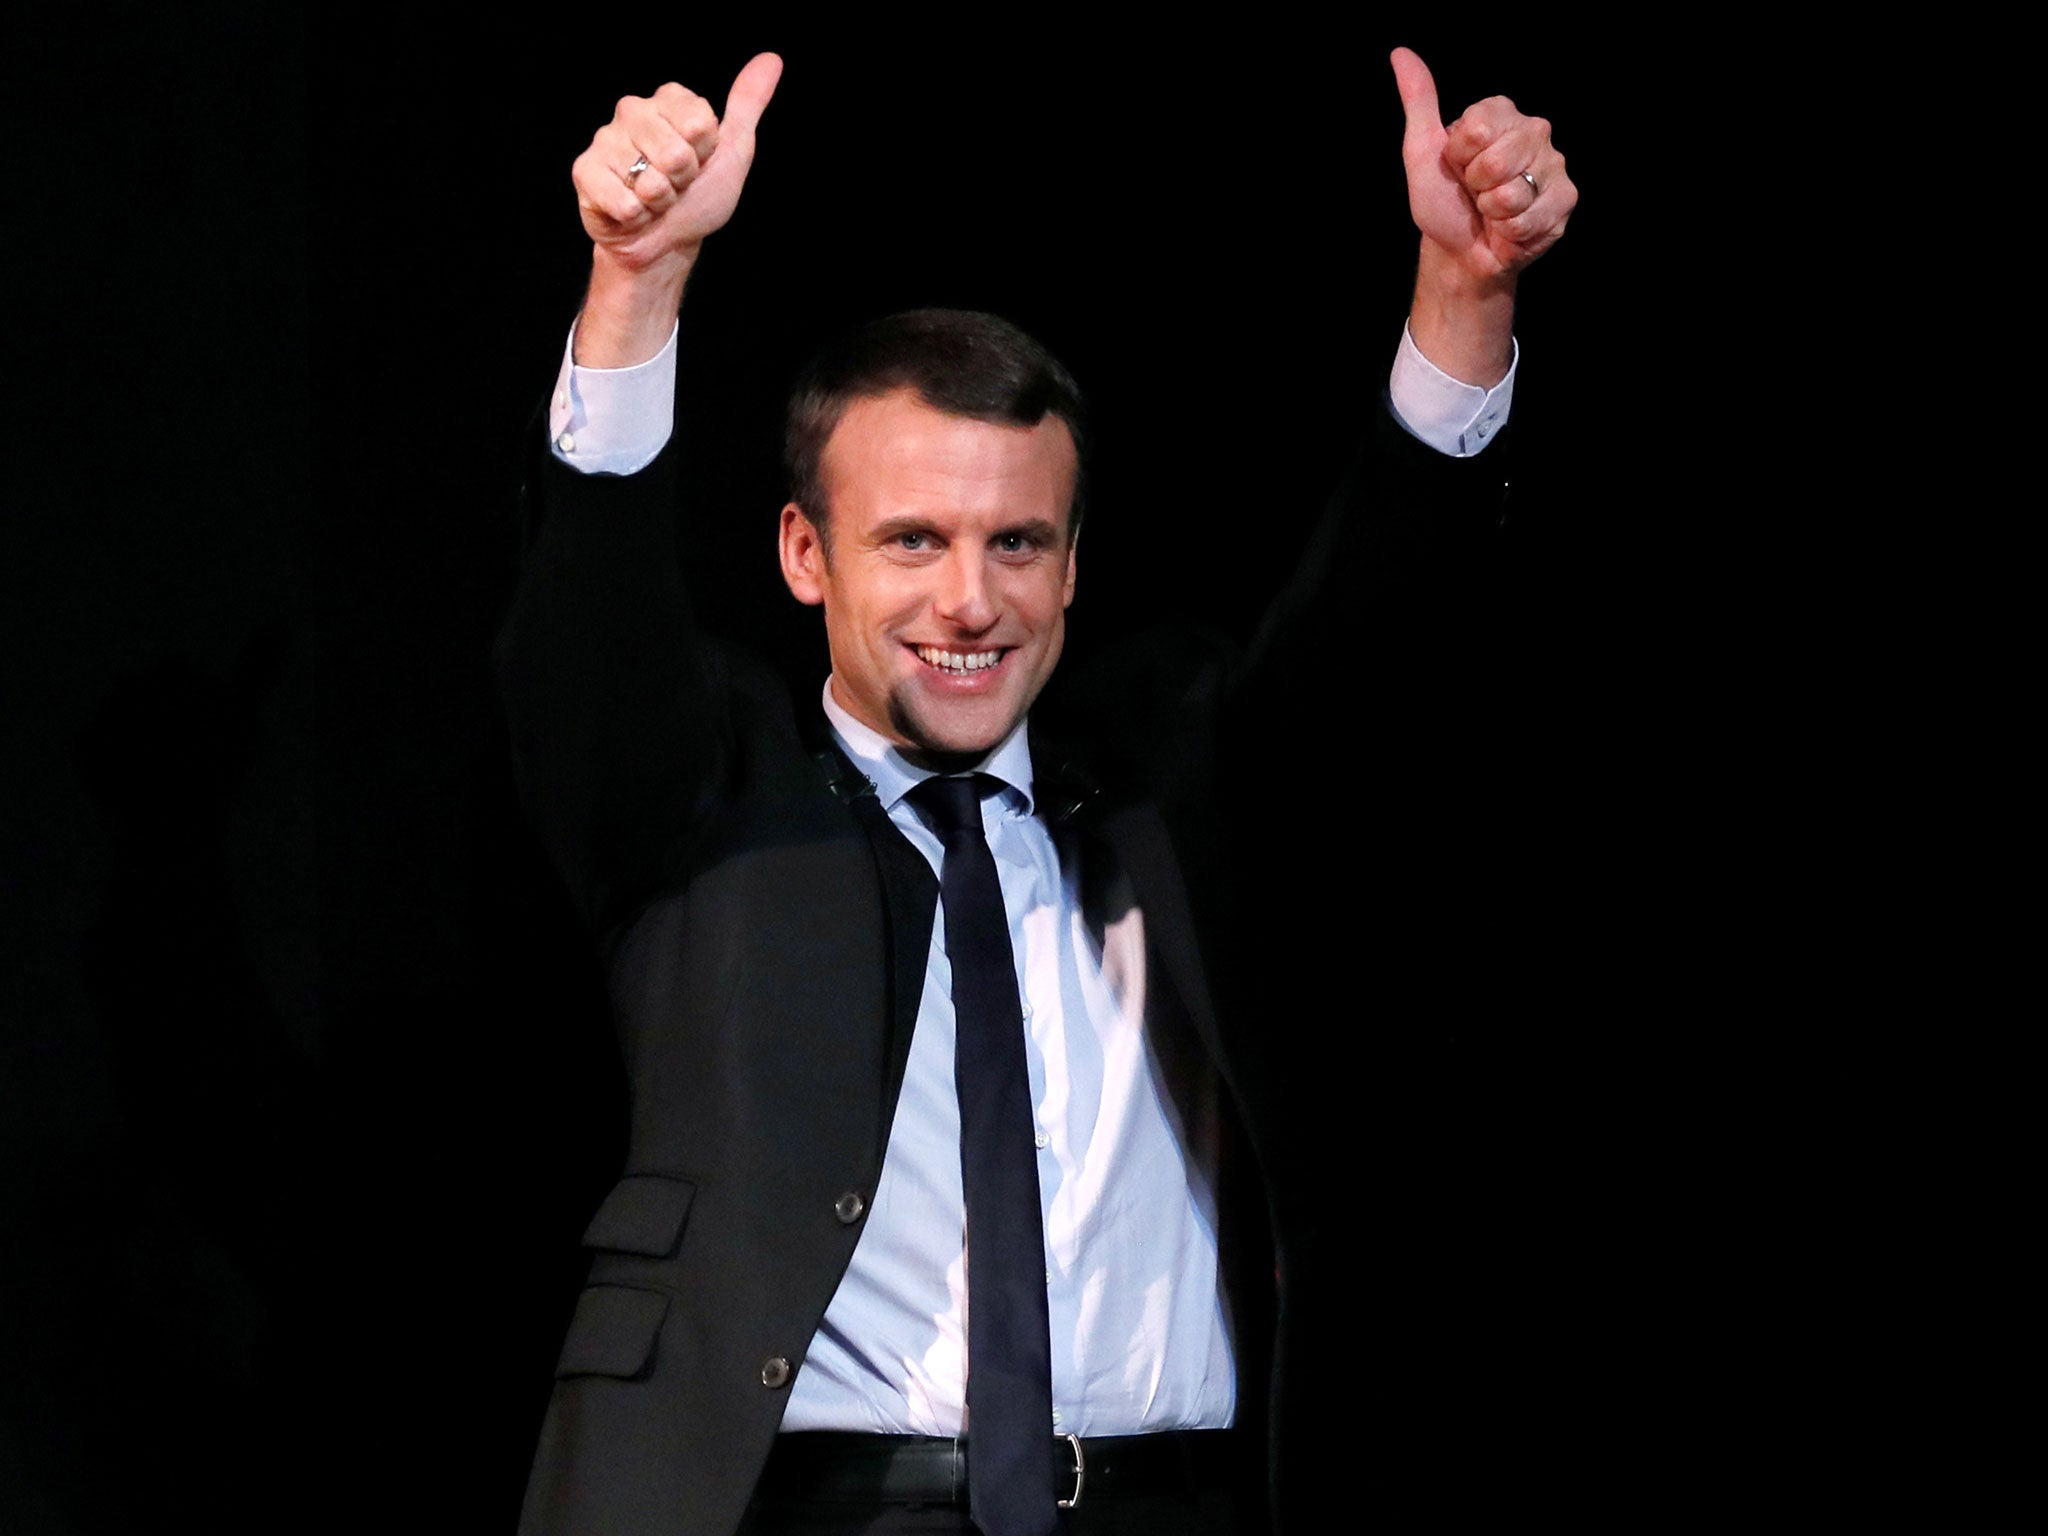 Mr Macron's En Marche! party said he had been the target of a "massive" attack